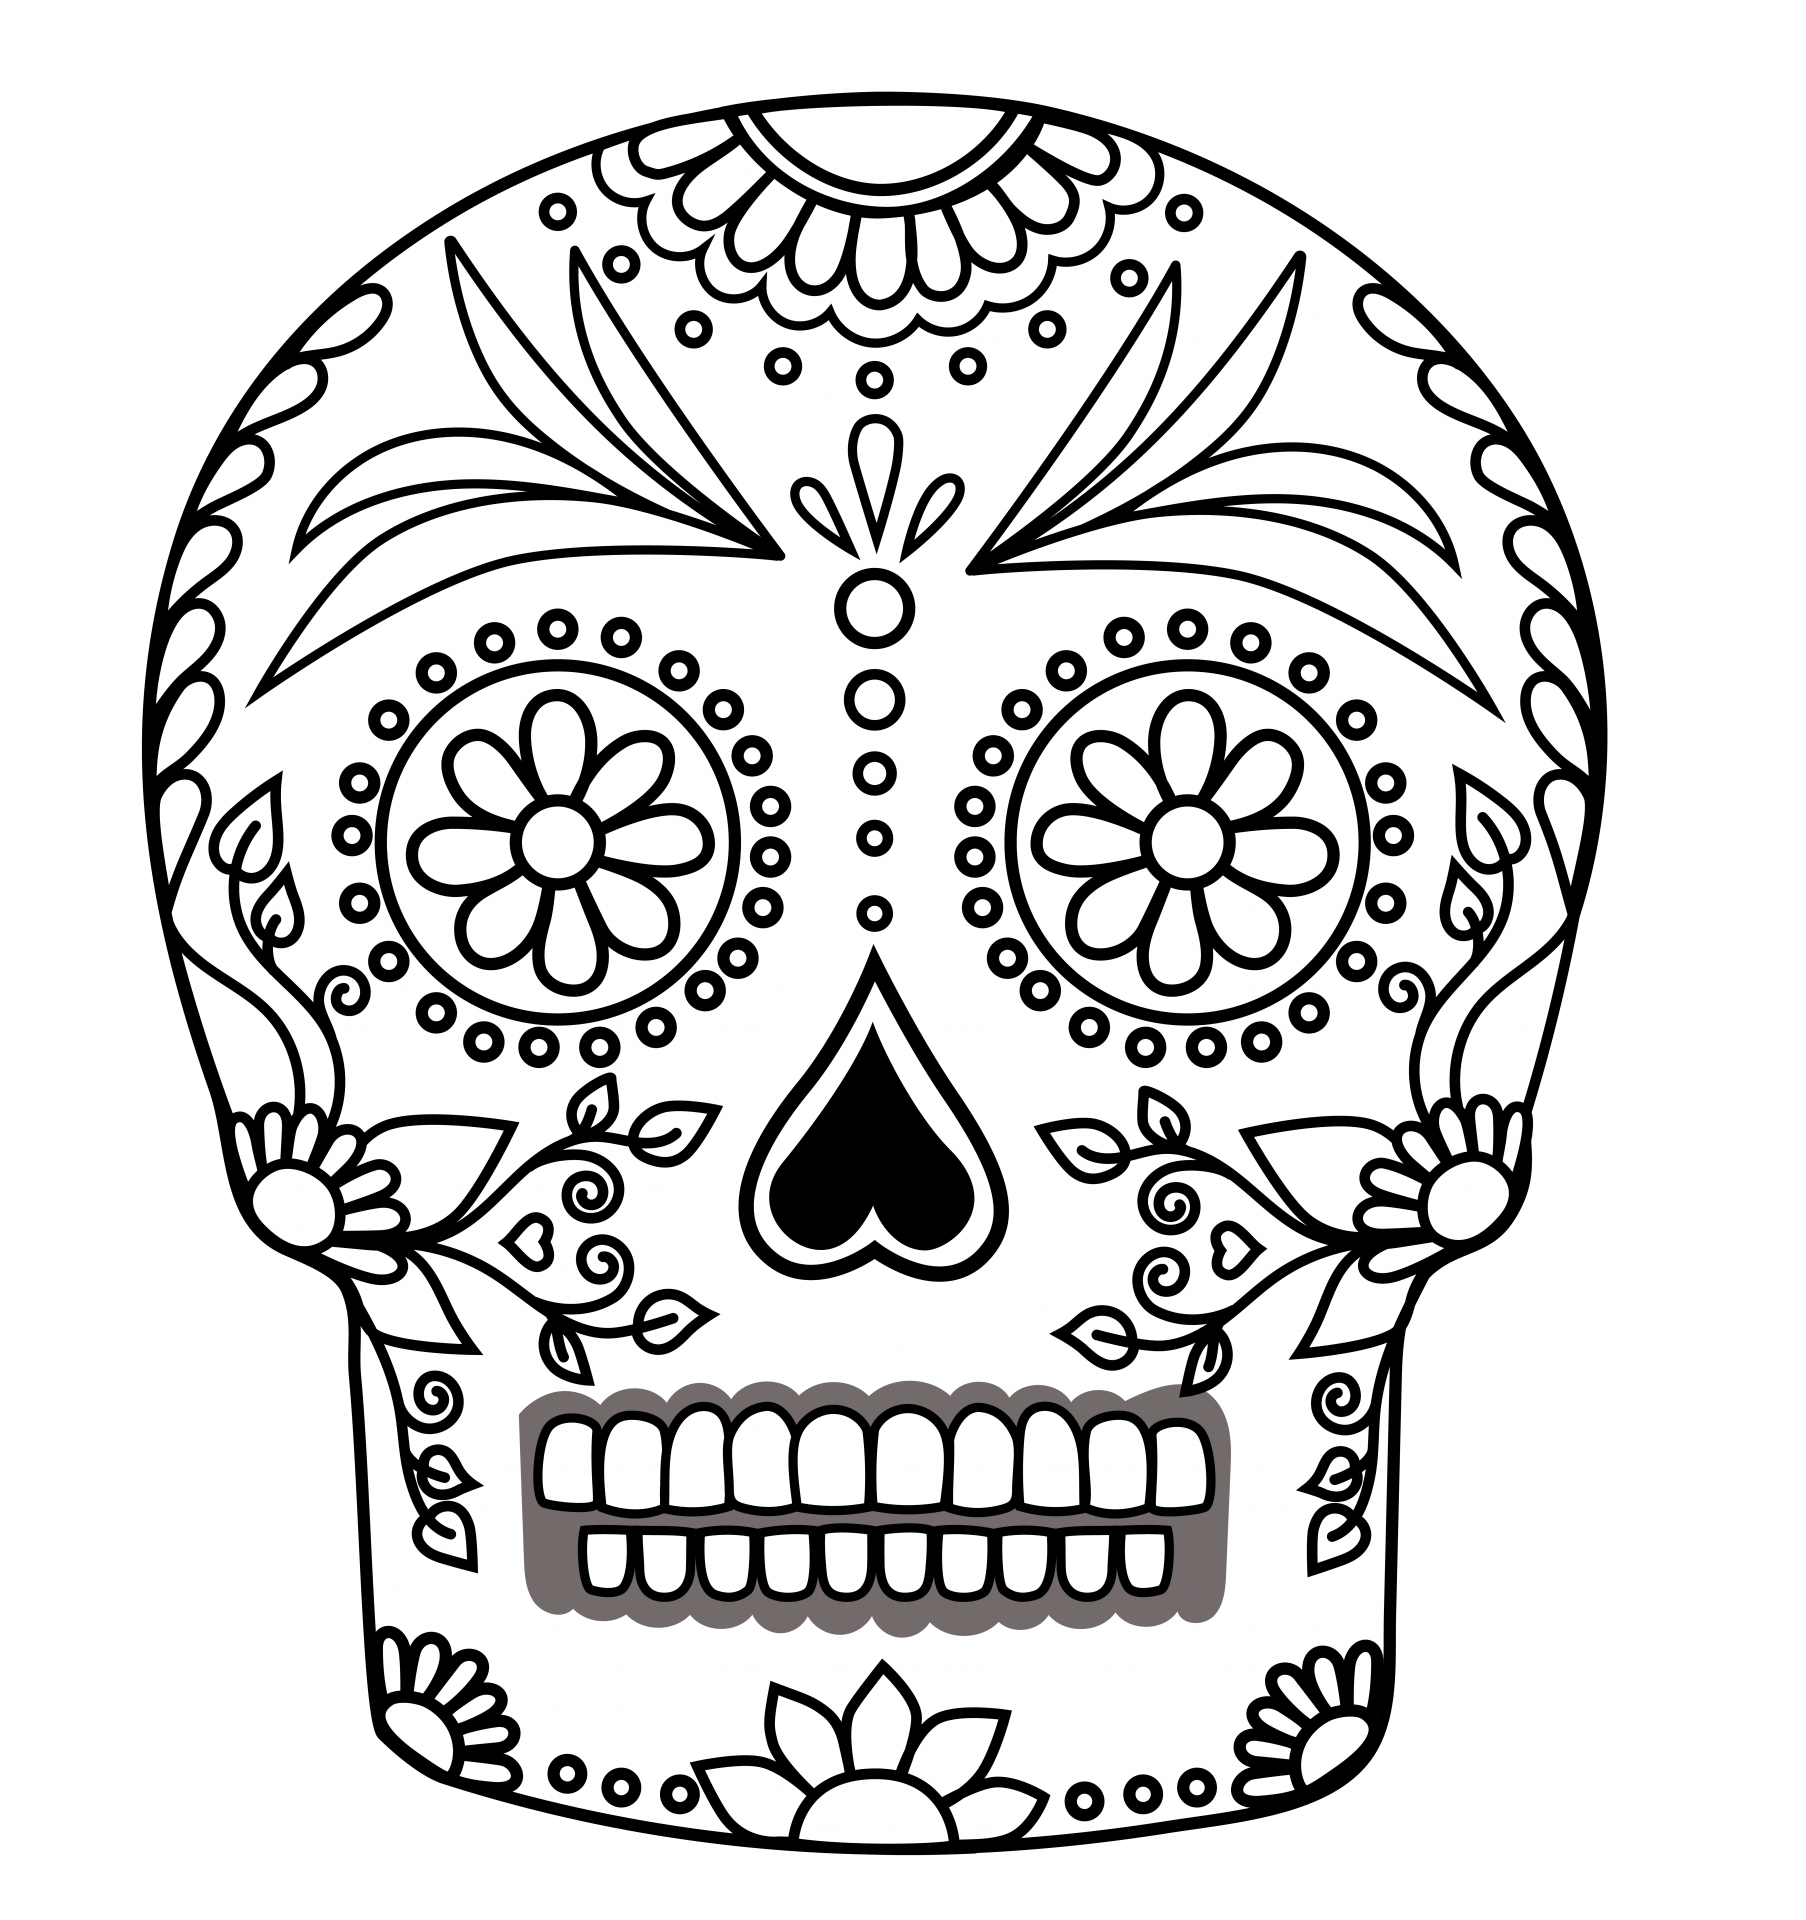 day-of-the-dead-skull-free-stock-photo-public-domain-pictures